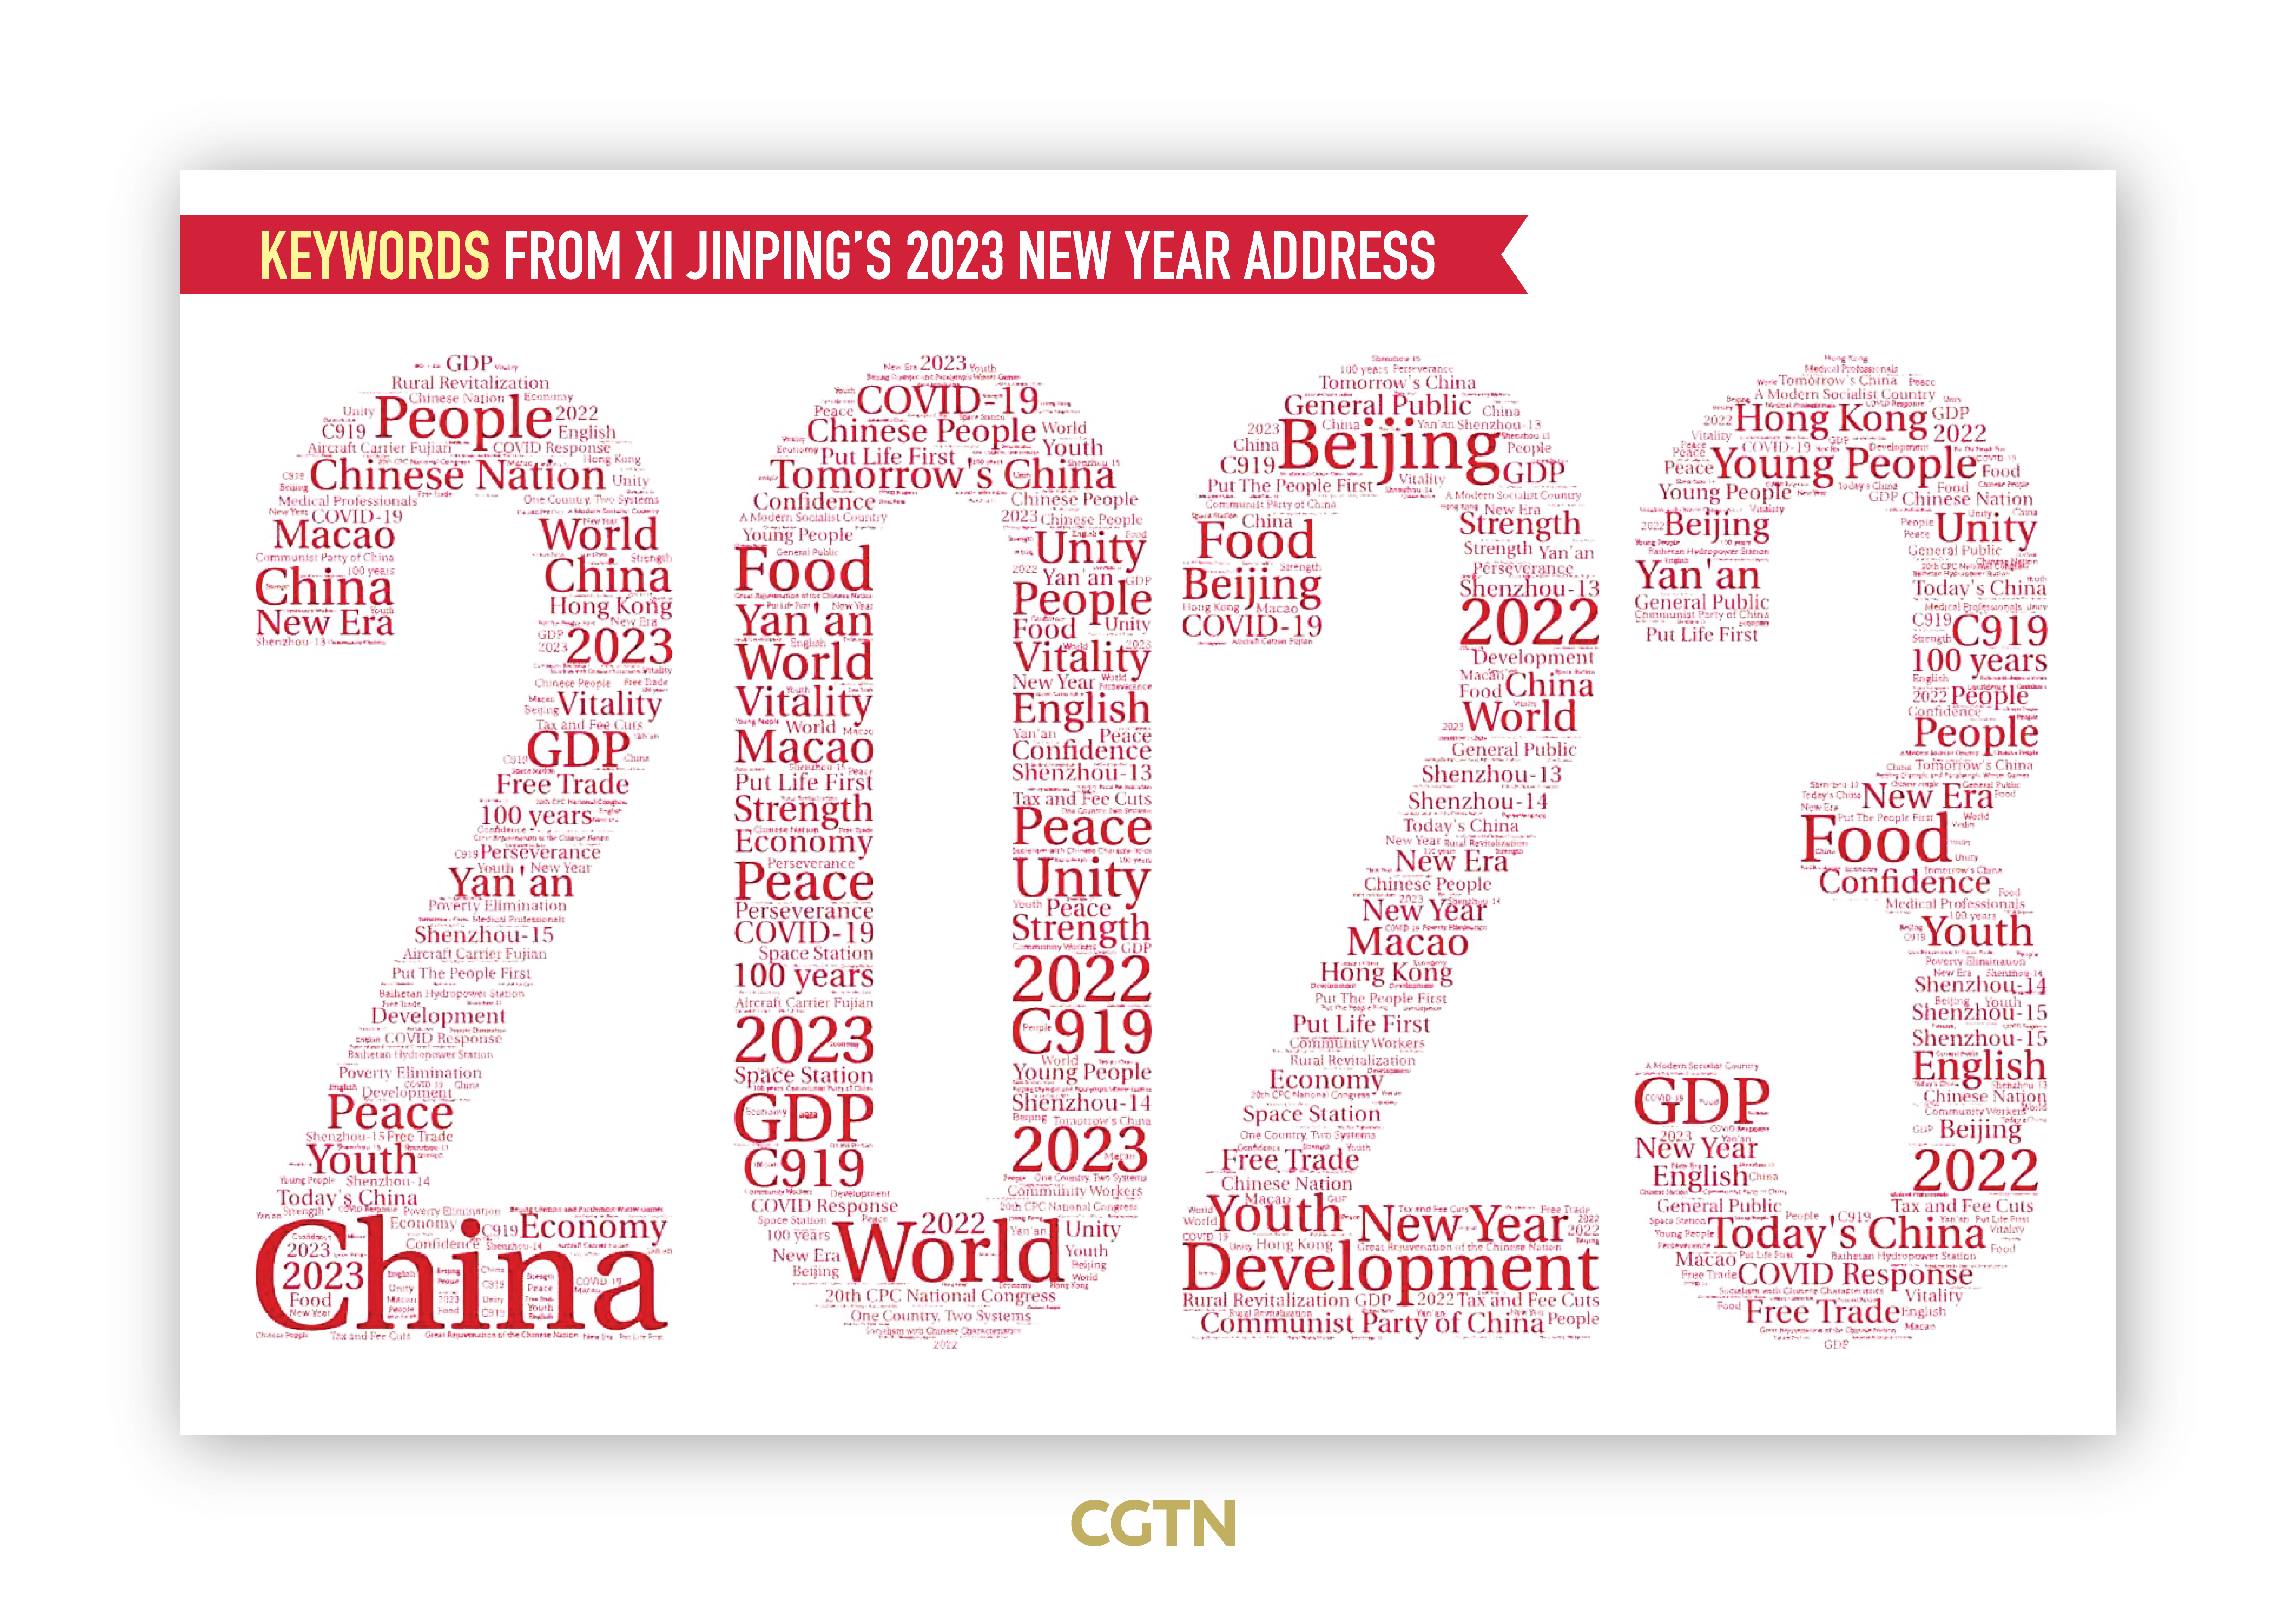 Graphics: Key things from Xi Jinping's 2023 New Year address